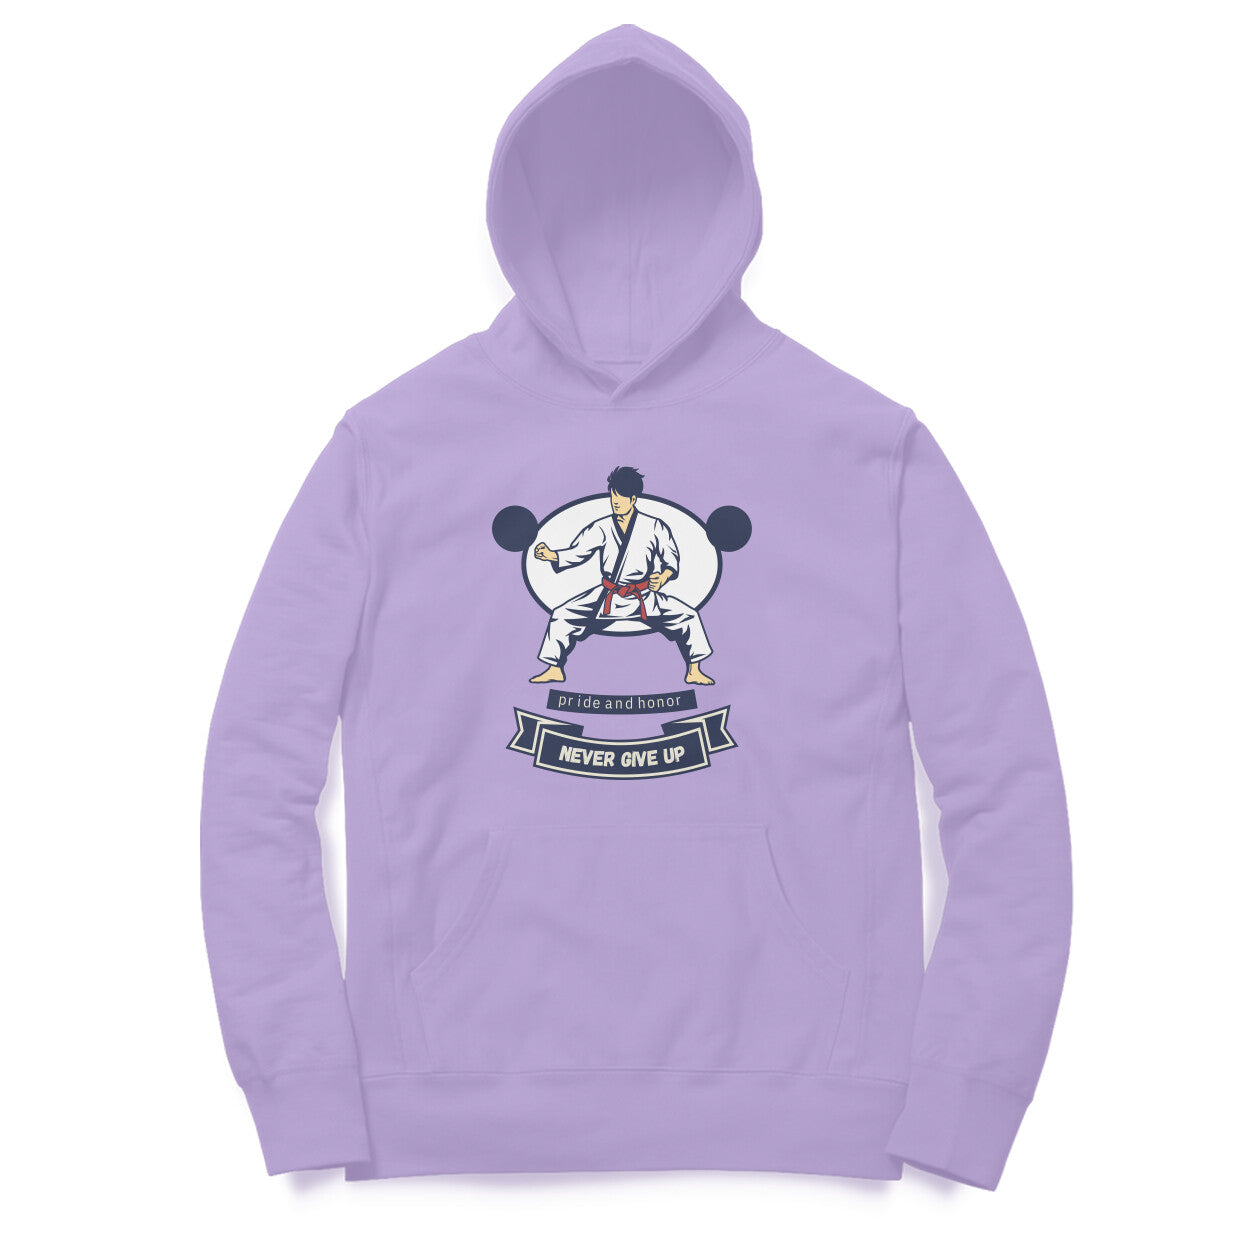 Bilkool Never Give Up Cotton Hoodies